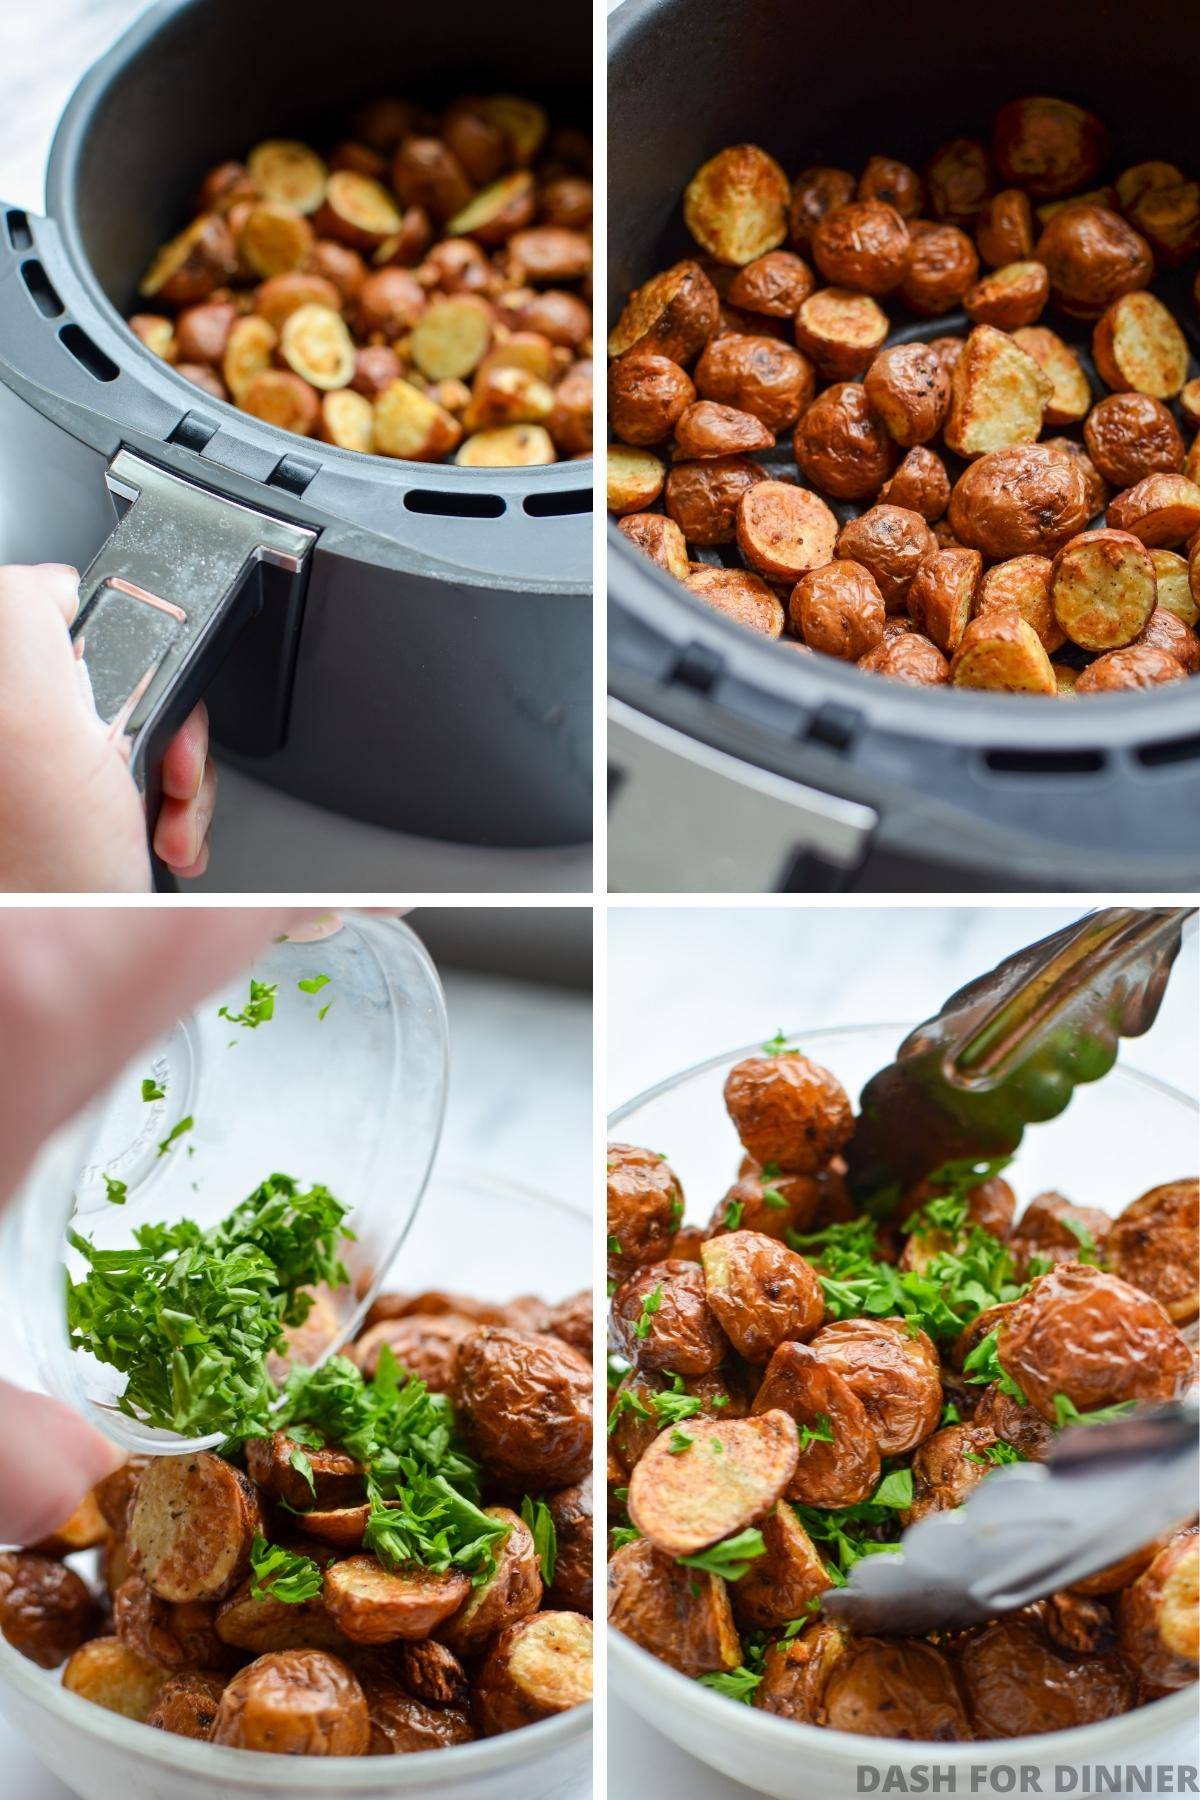 Shaking an air fryer and adding parsley to baby potatoes.